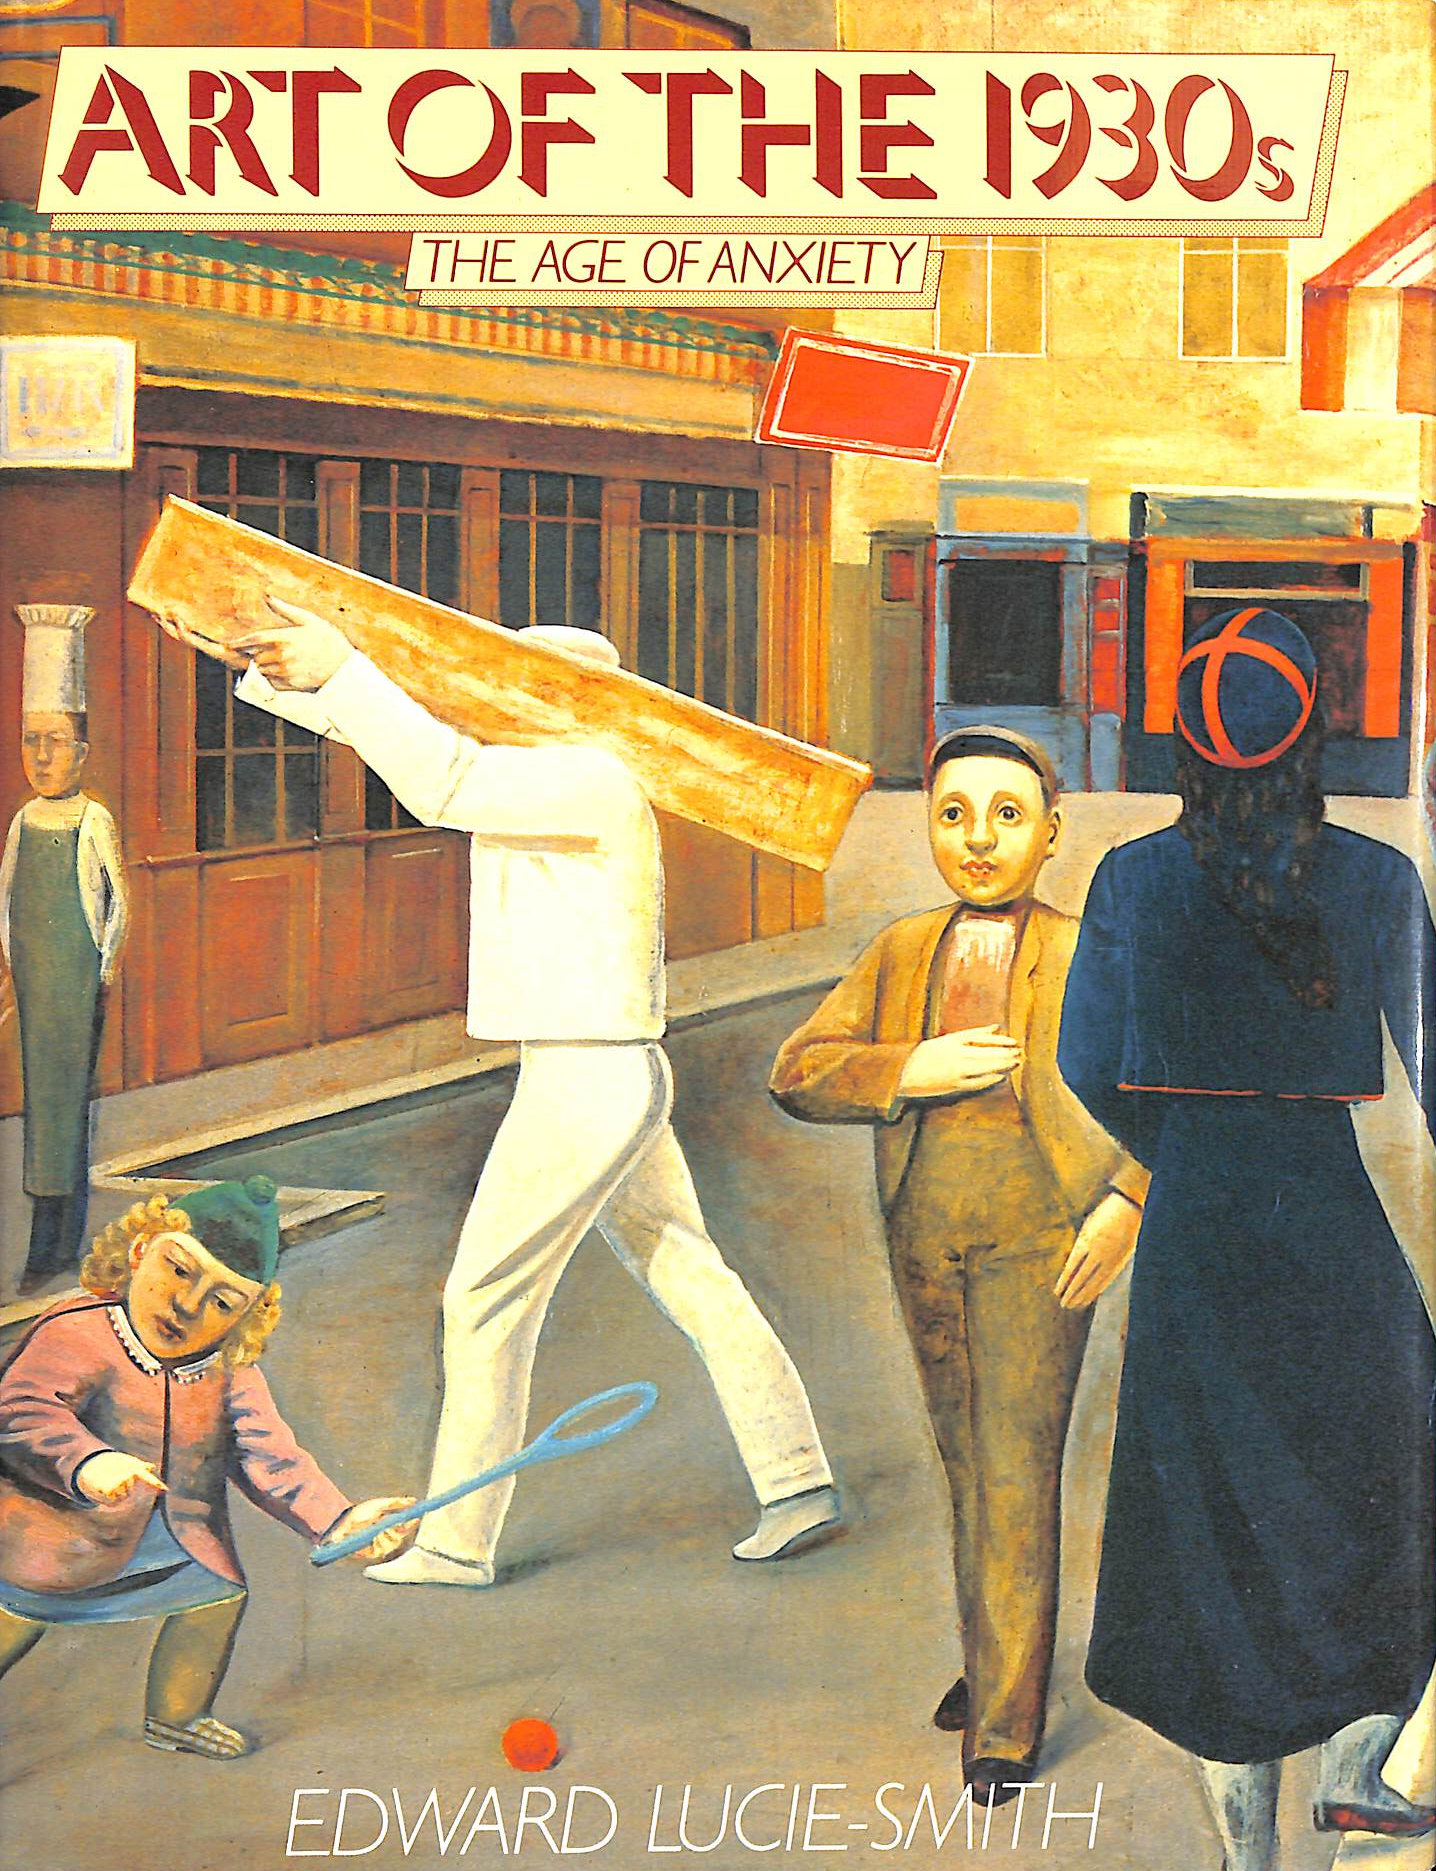 LUCIE-SMITH, EDWARD - Art of the 1930's: The Age of Anxiety